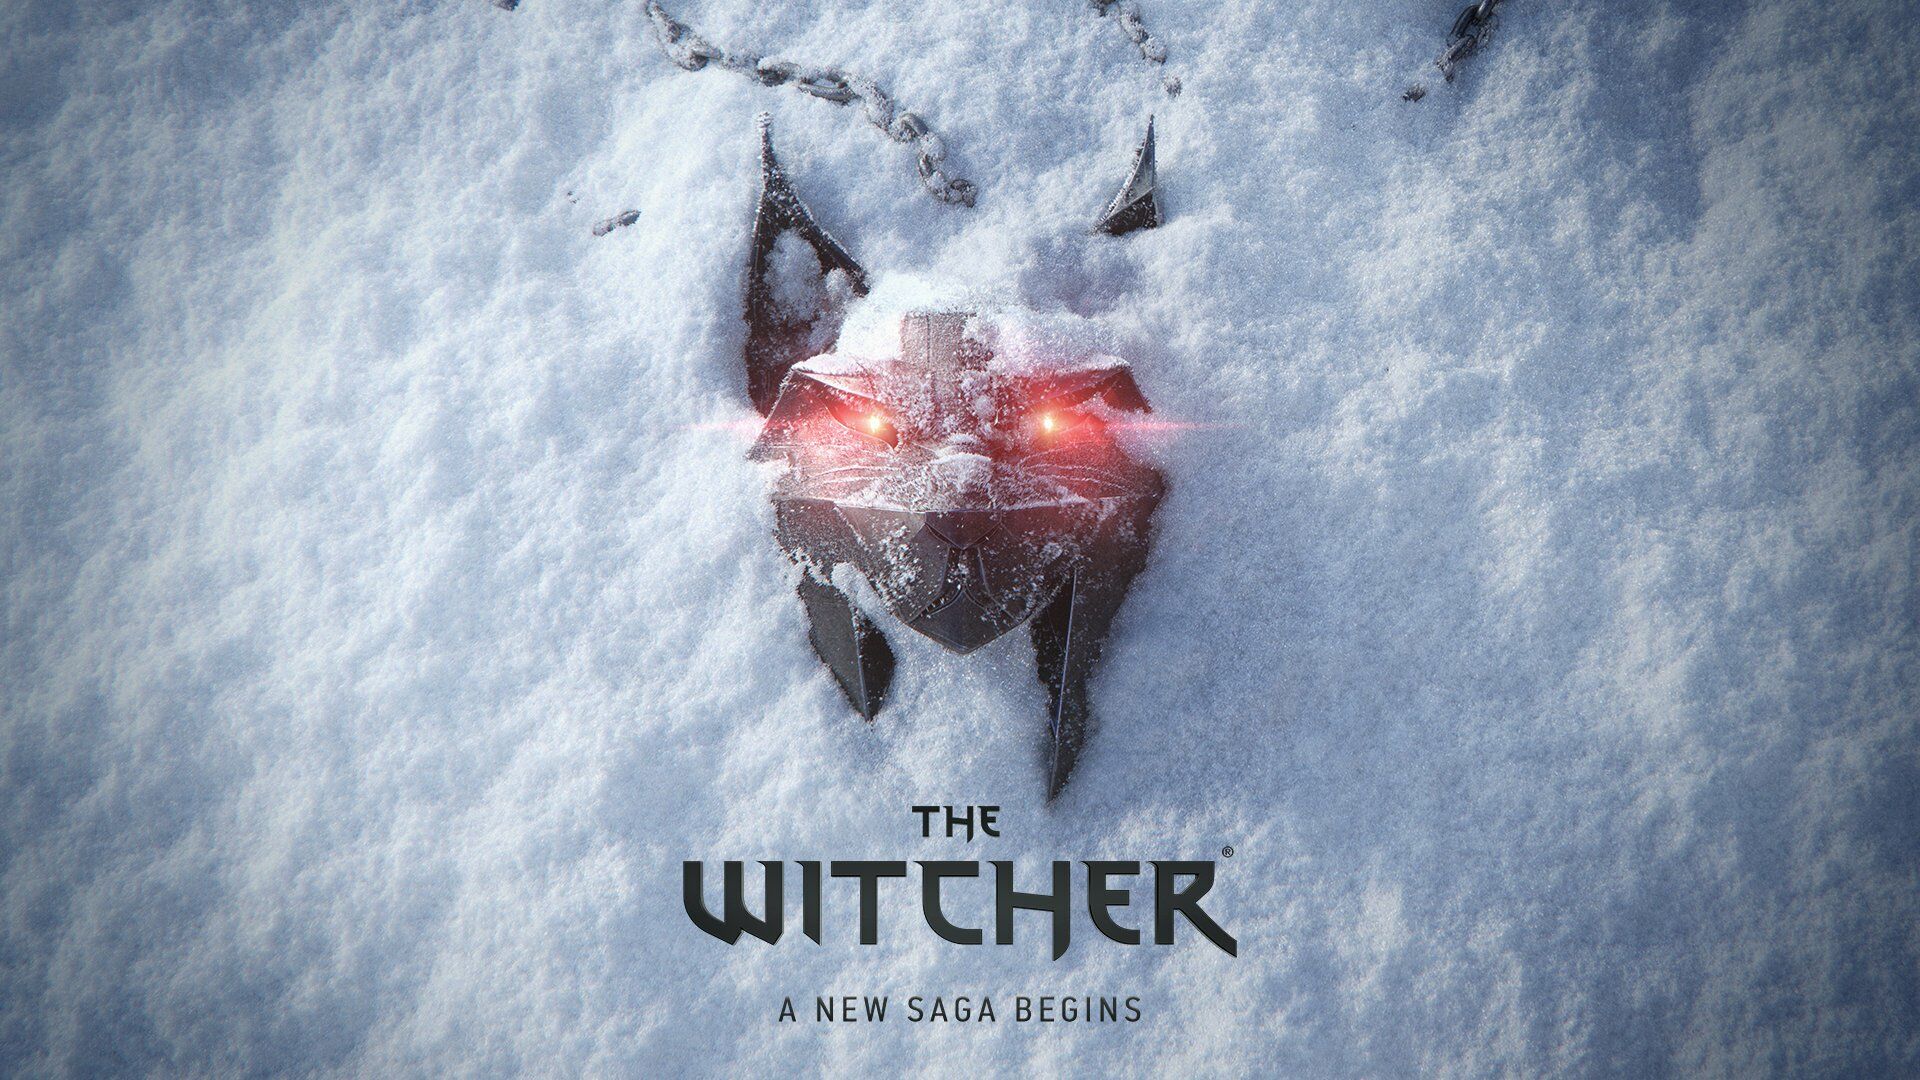 CD Projekt The Witcher